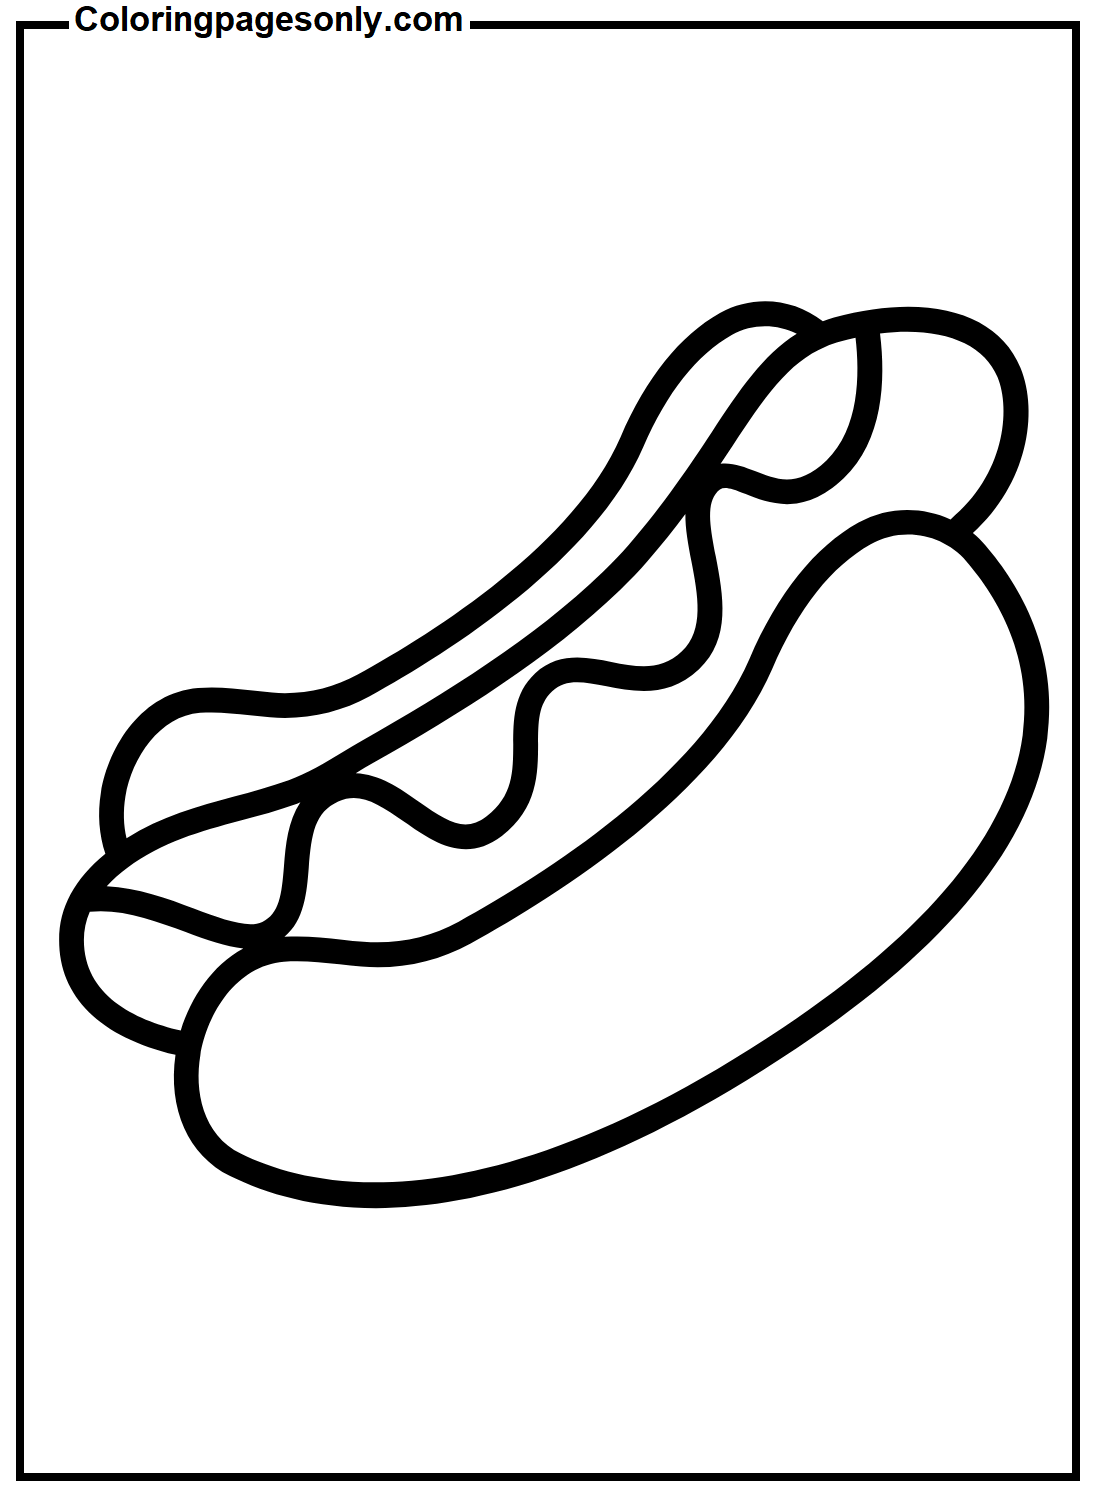 Huge Hot Dog Coloring Pages